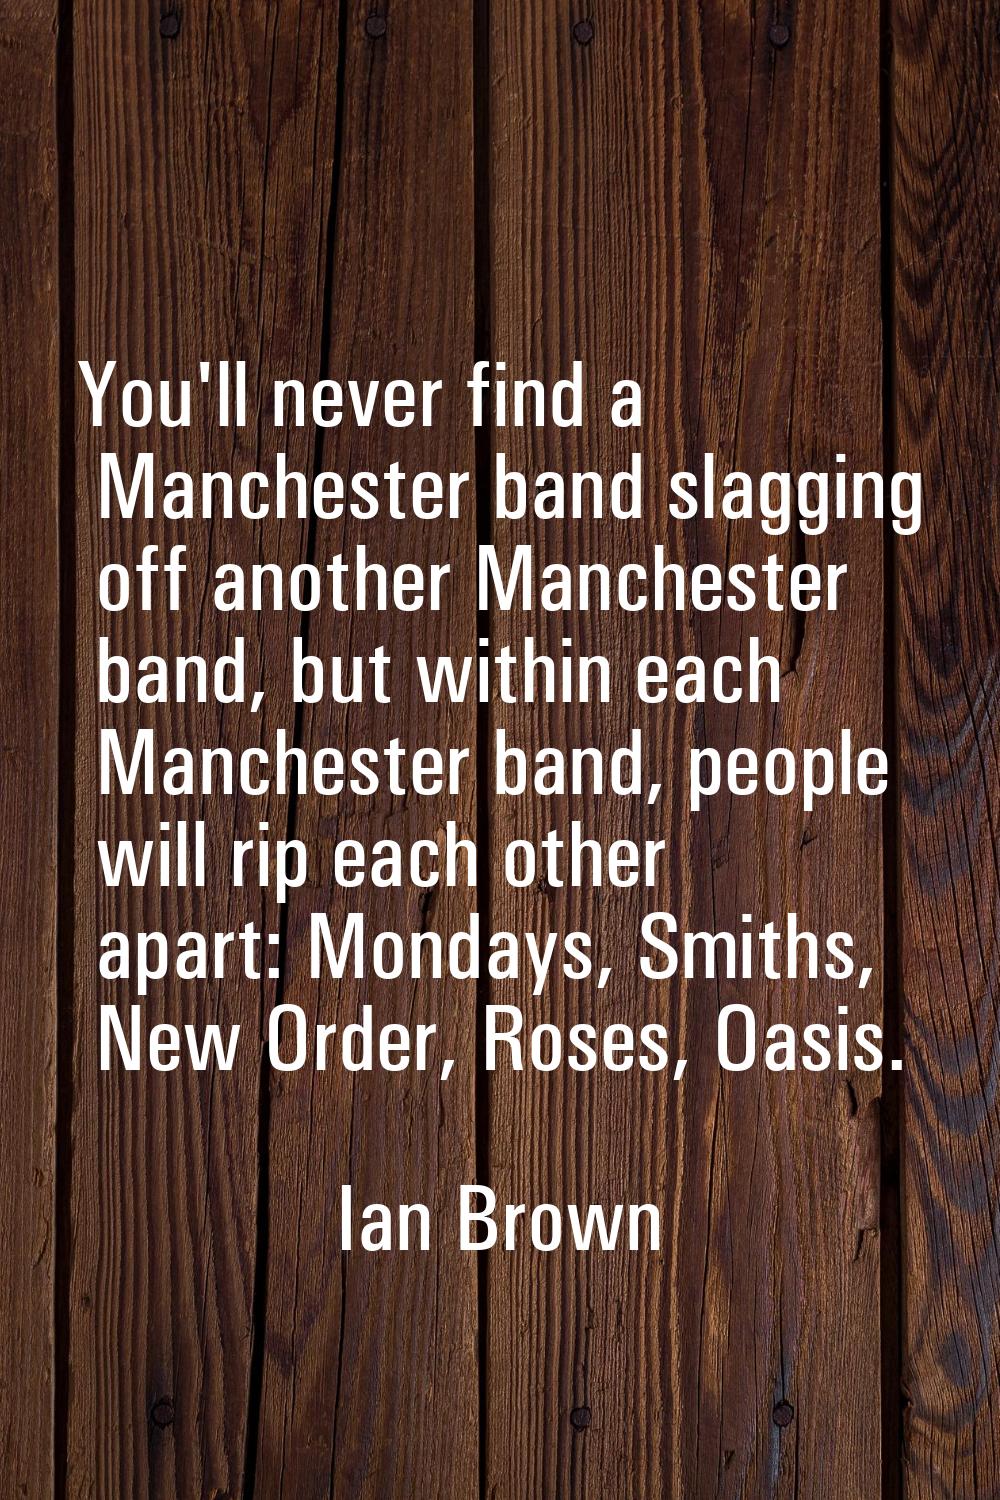 You'll never find a Manchester band slagging off another Manchester band, but within each Mancheste